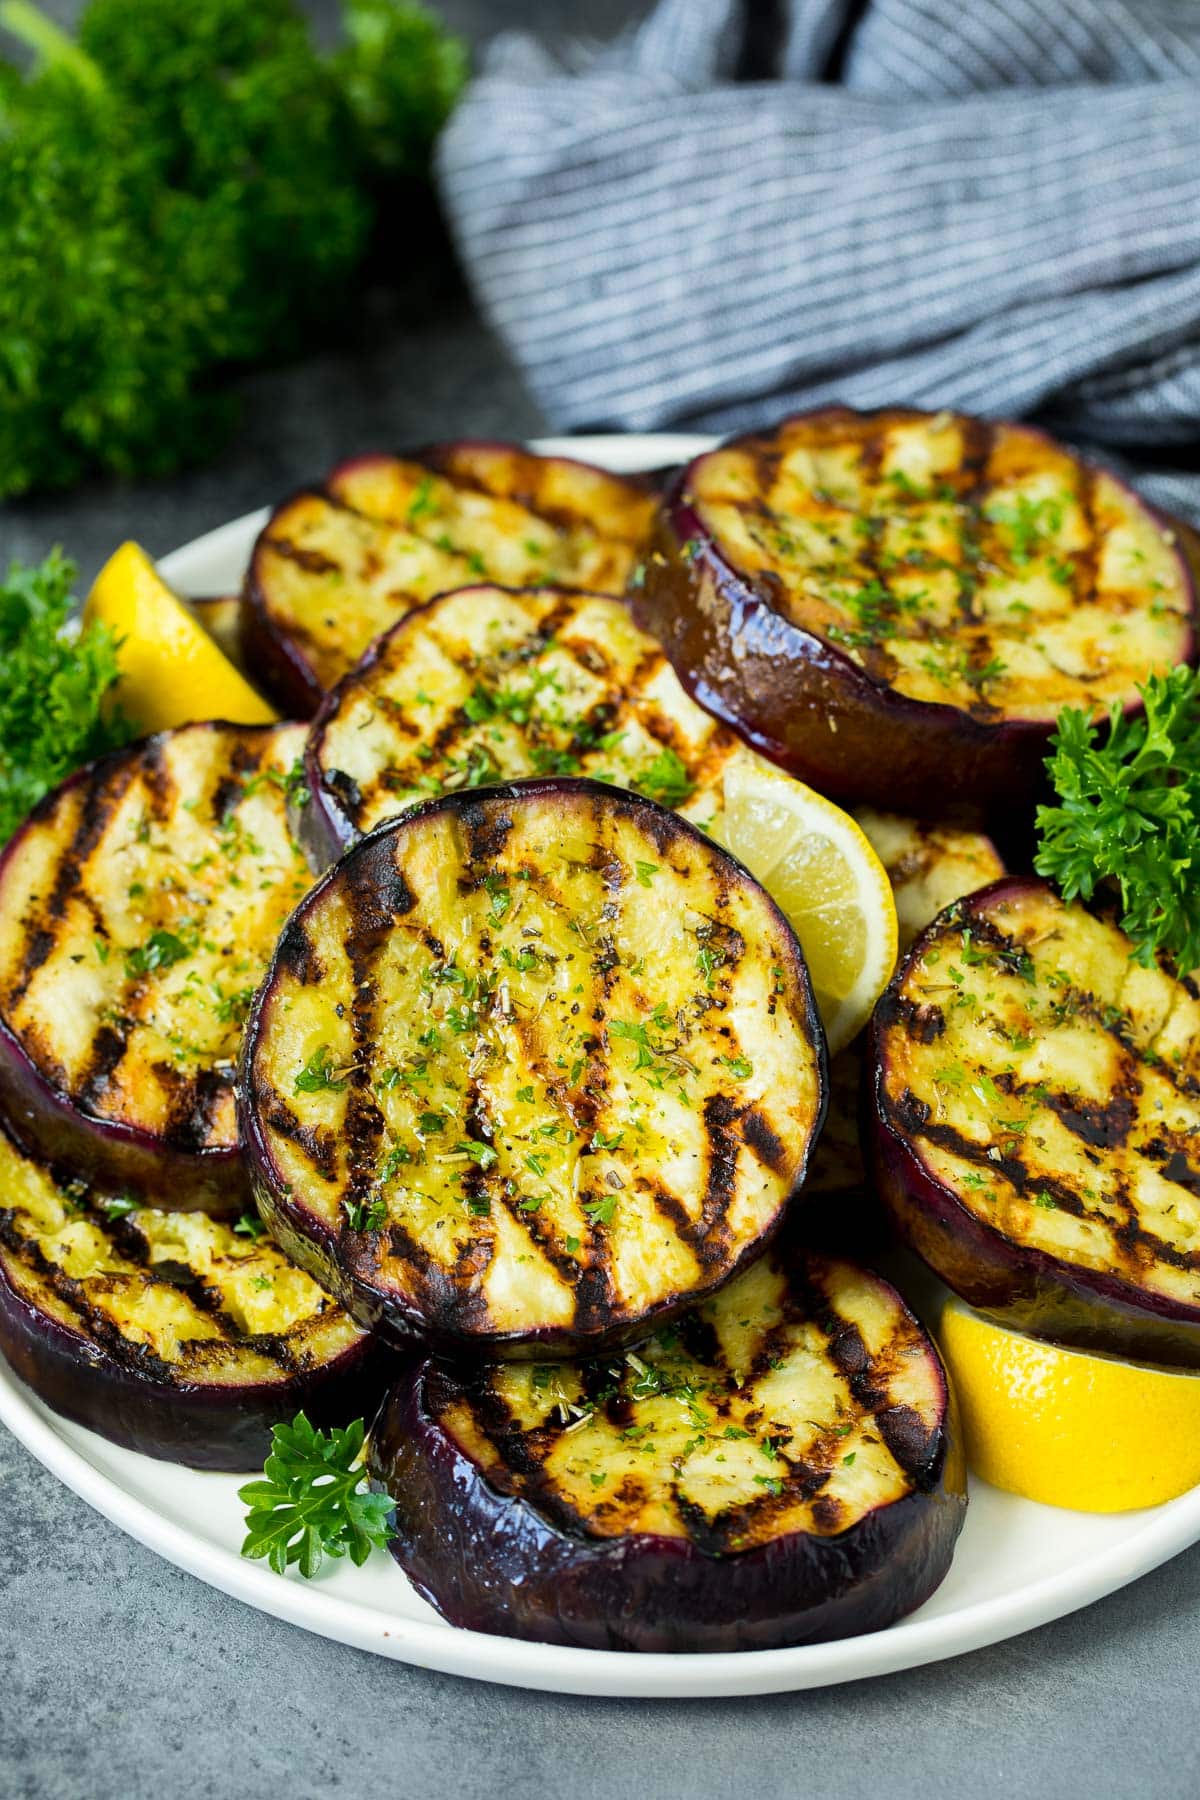 A platter of grilled eggplant garnished with lemon and parsley.